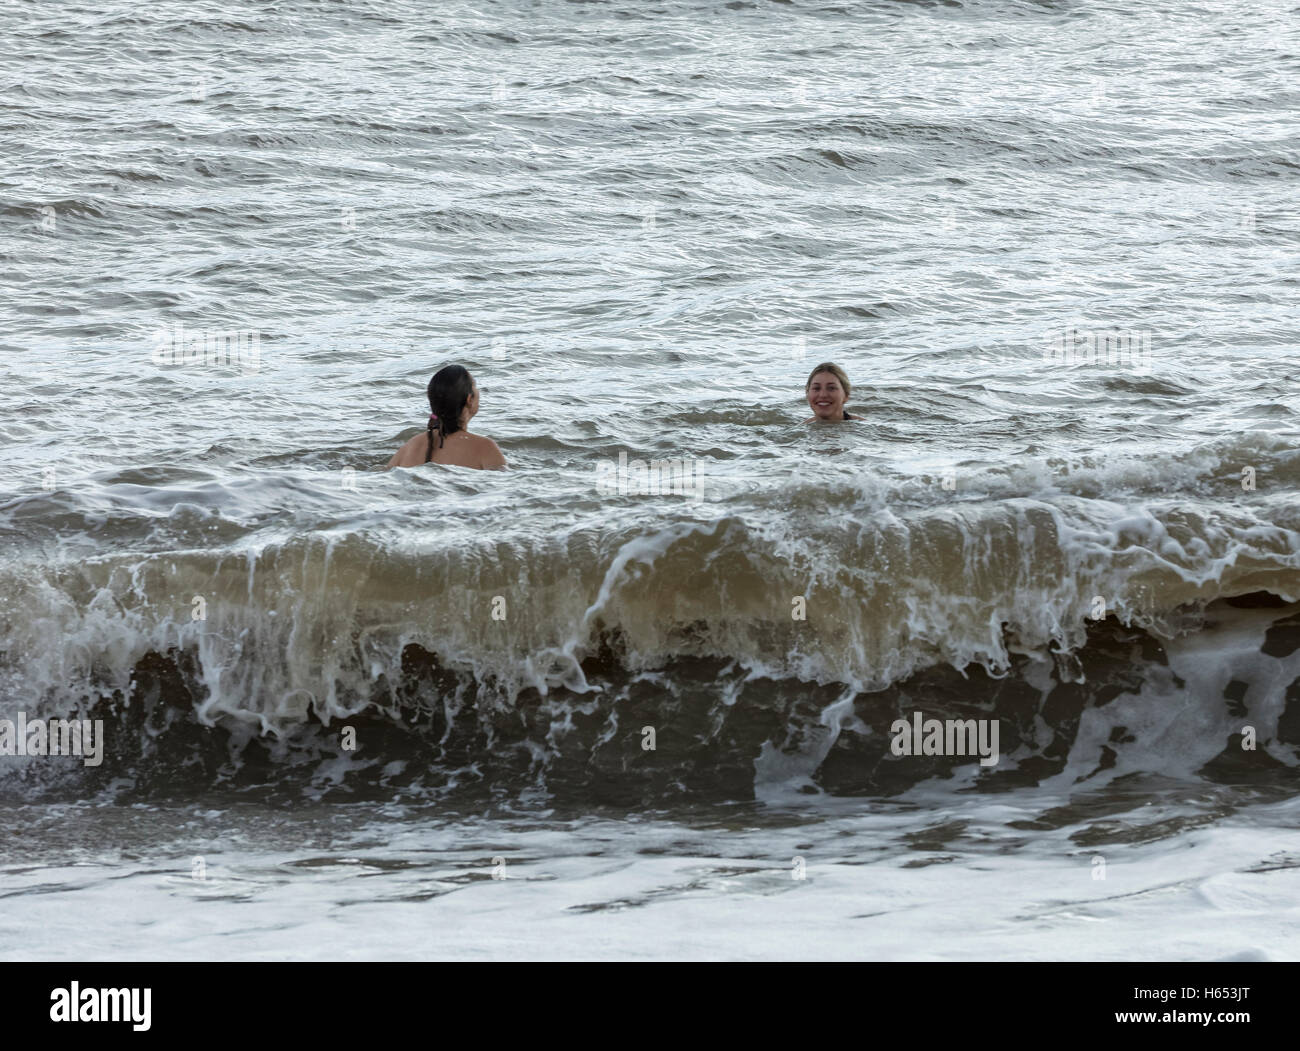 Two young women swmming in a very cold sea at Aldeburgh in Suffolk with a large wave. One of the women has her back to camera Stock Photo